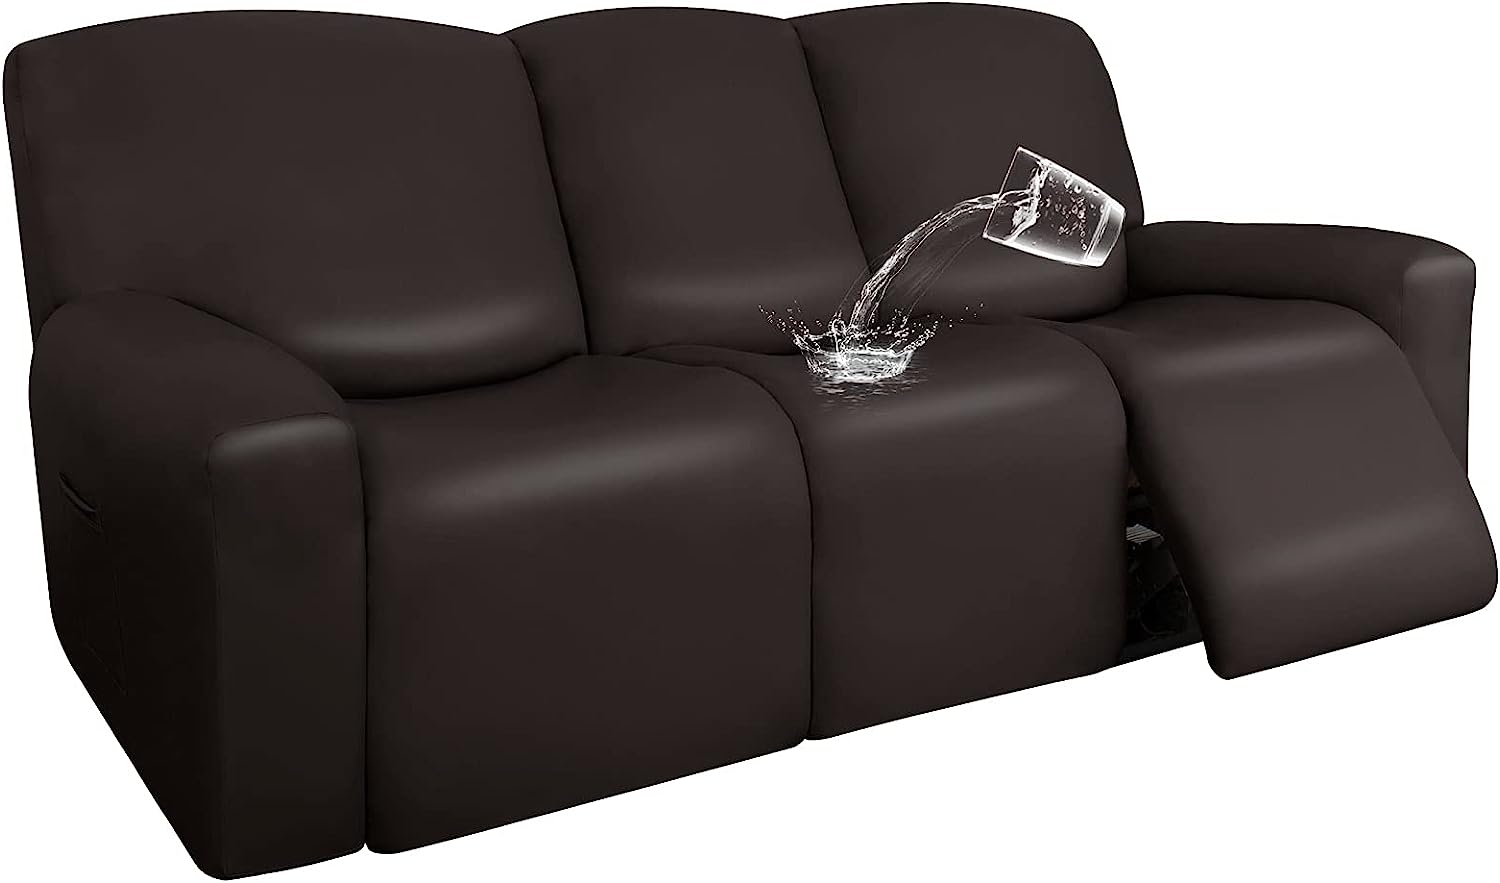 Easy-Going PU Leather Recliner Sofa Slipcovers